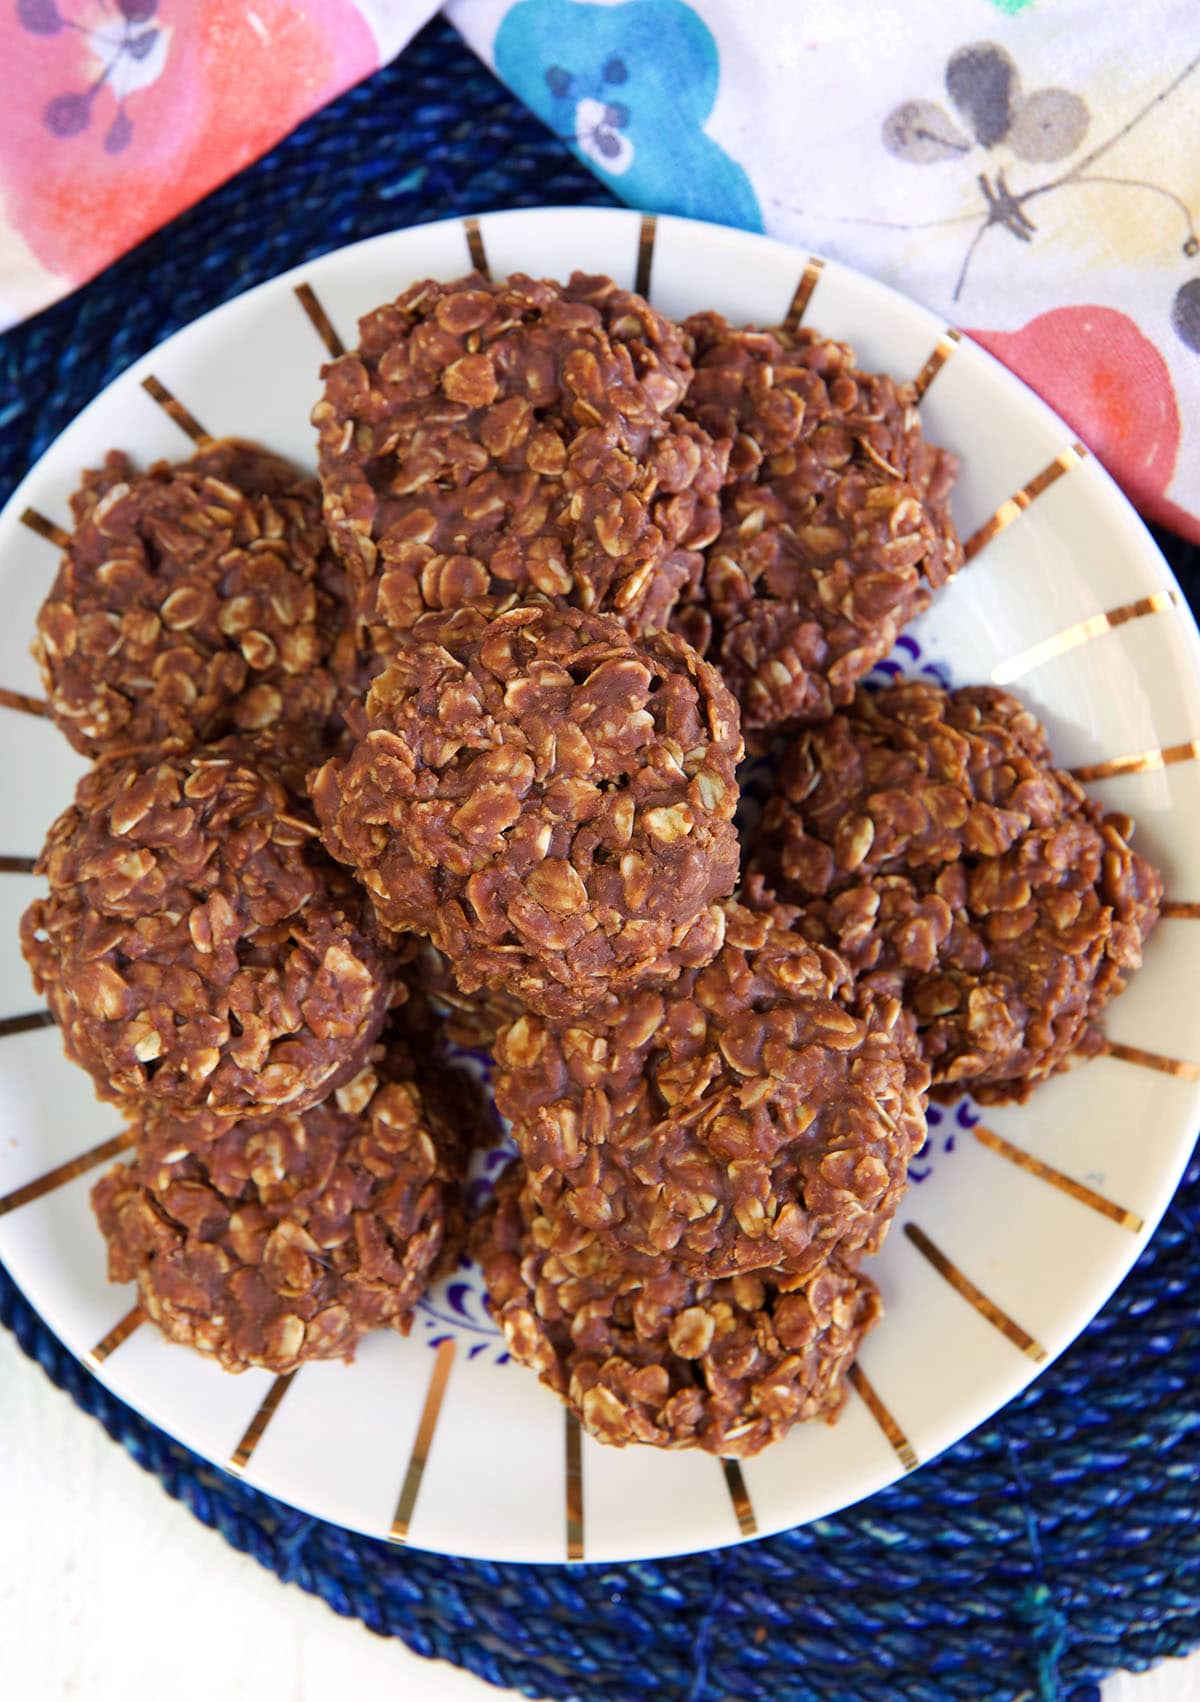 A batch of chocolate oatmeal cookies are on a plate.